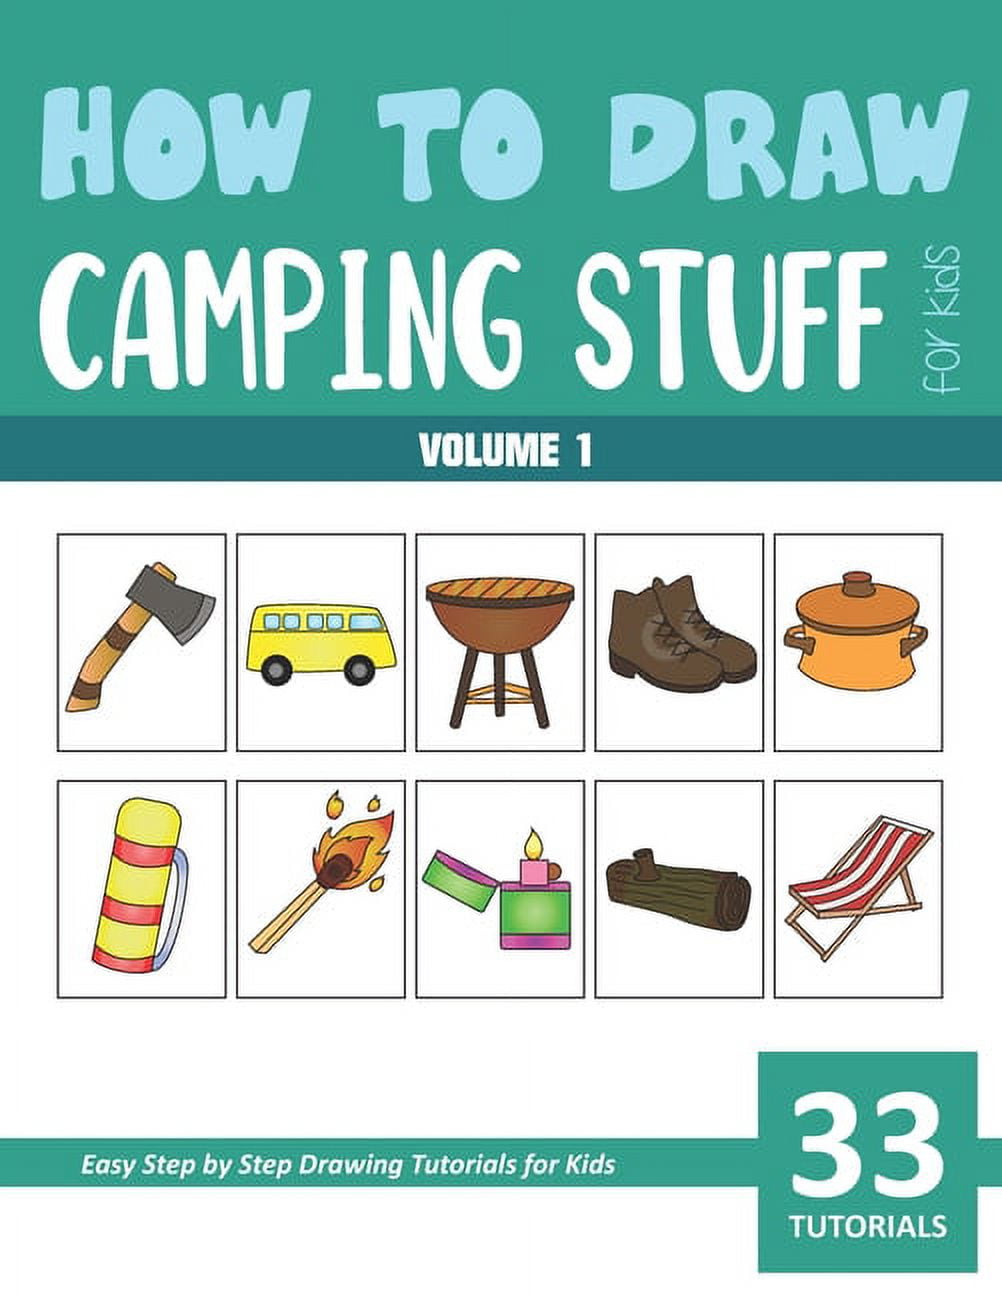 How to Draw Camping Stuff for Kids - Volume 1 [Book]